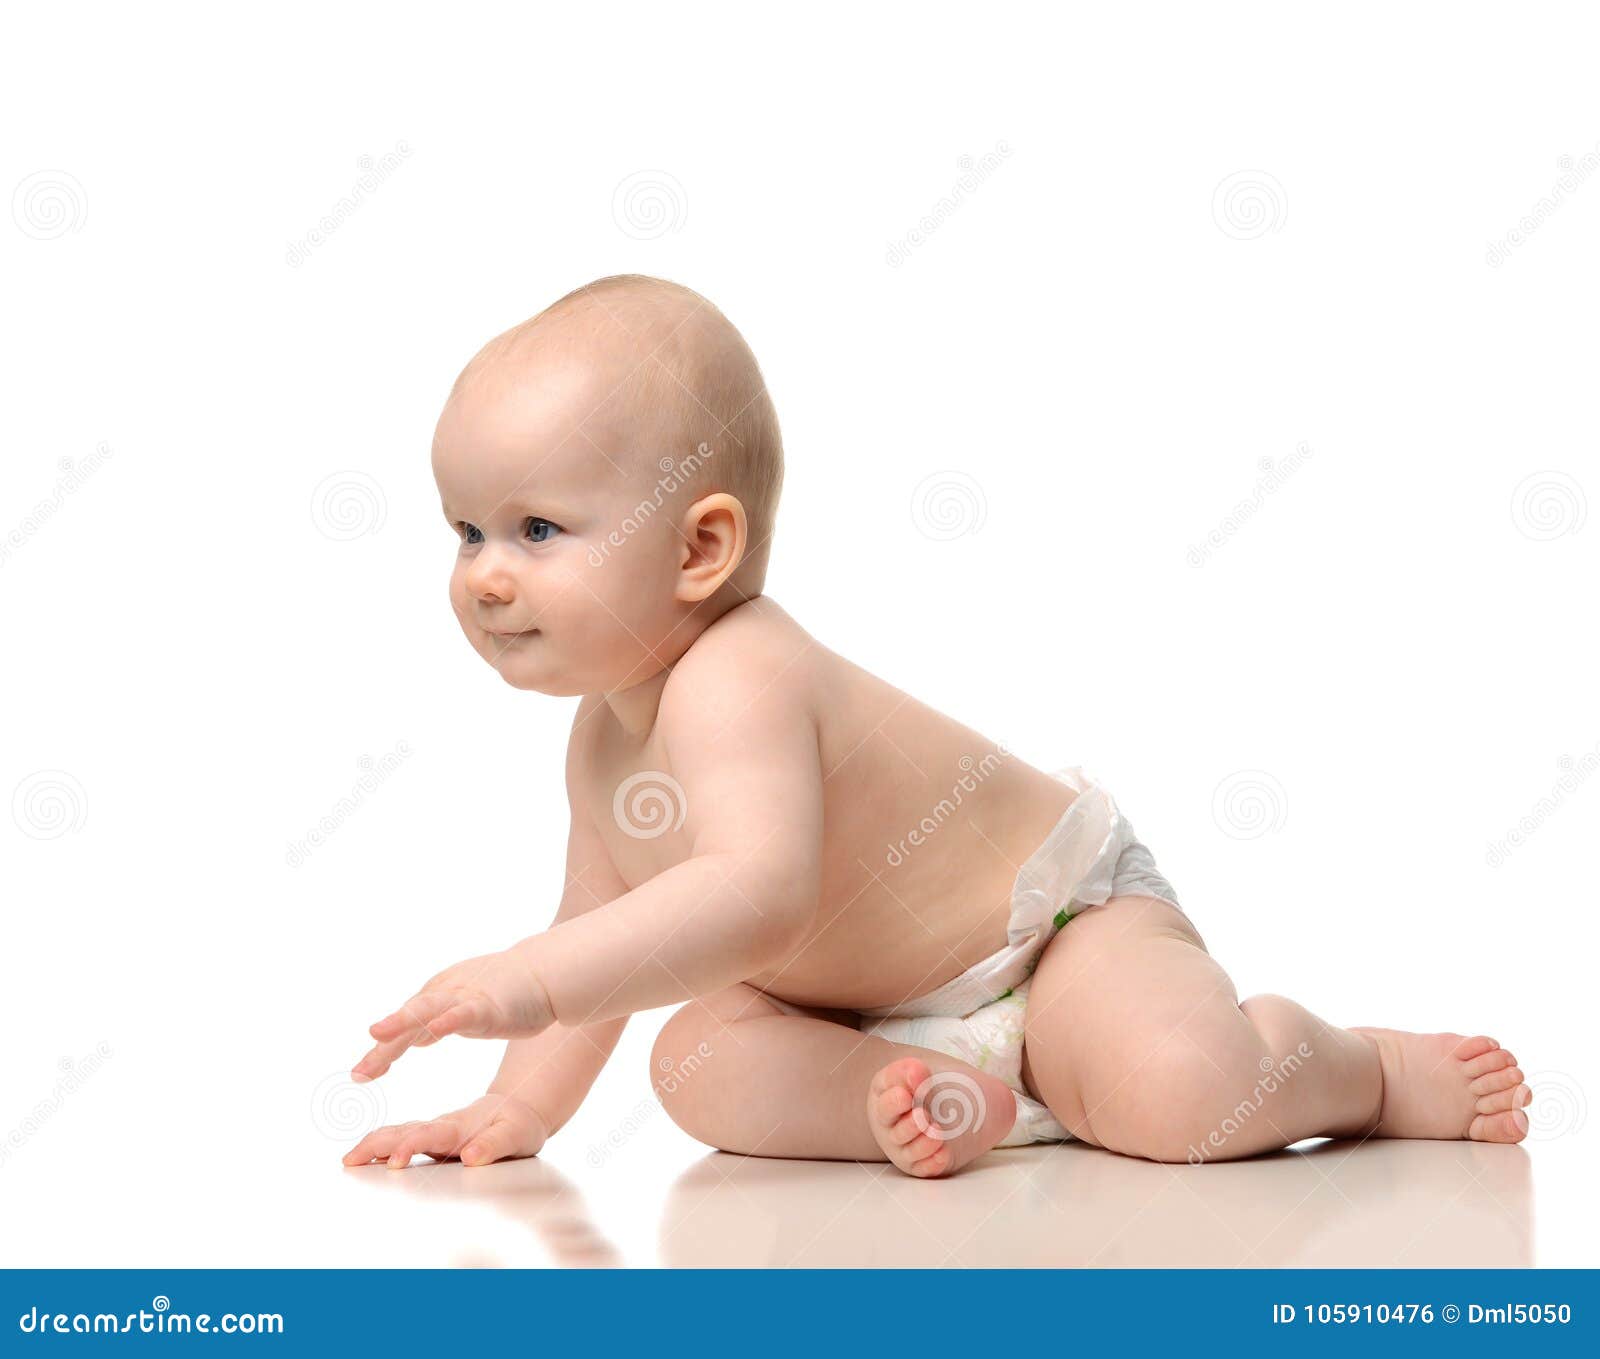 infant child baby girl crawling and happy looking at the corner